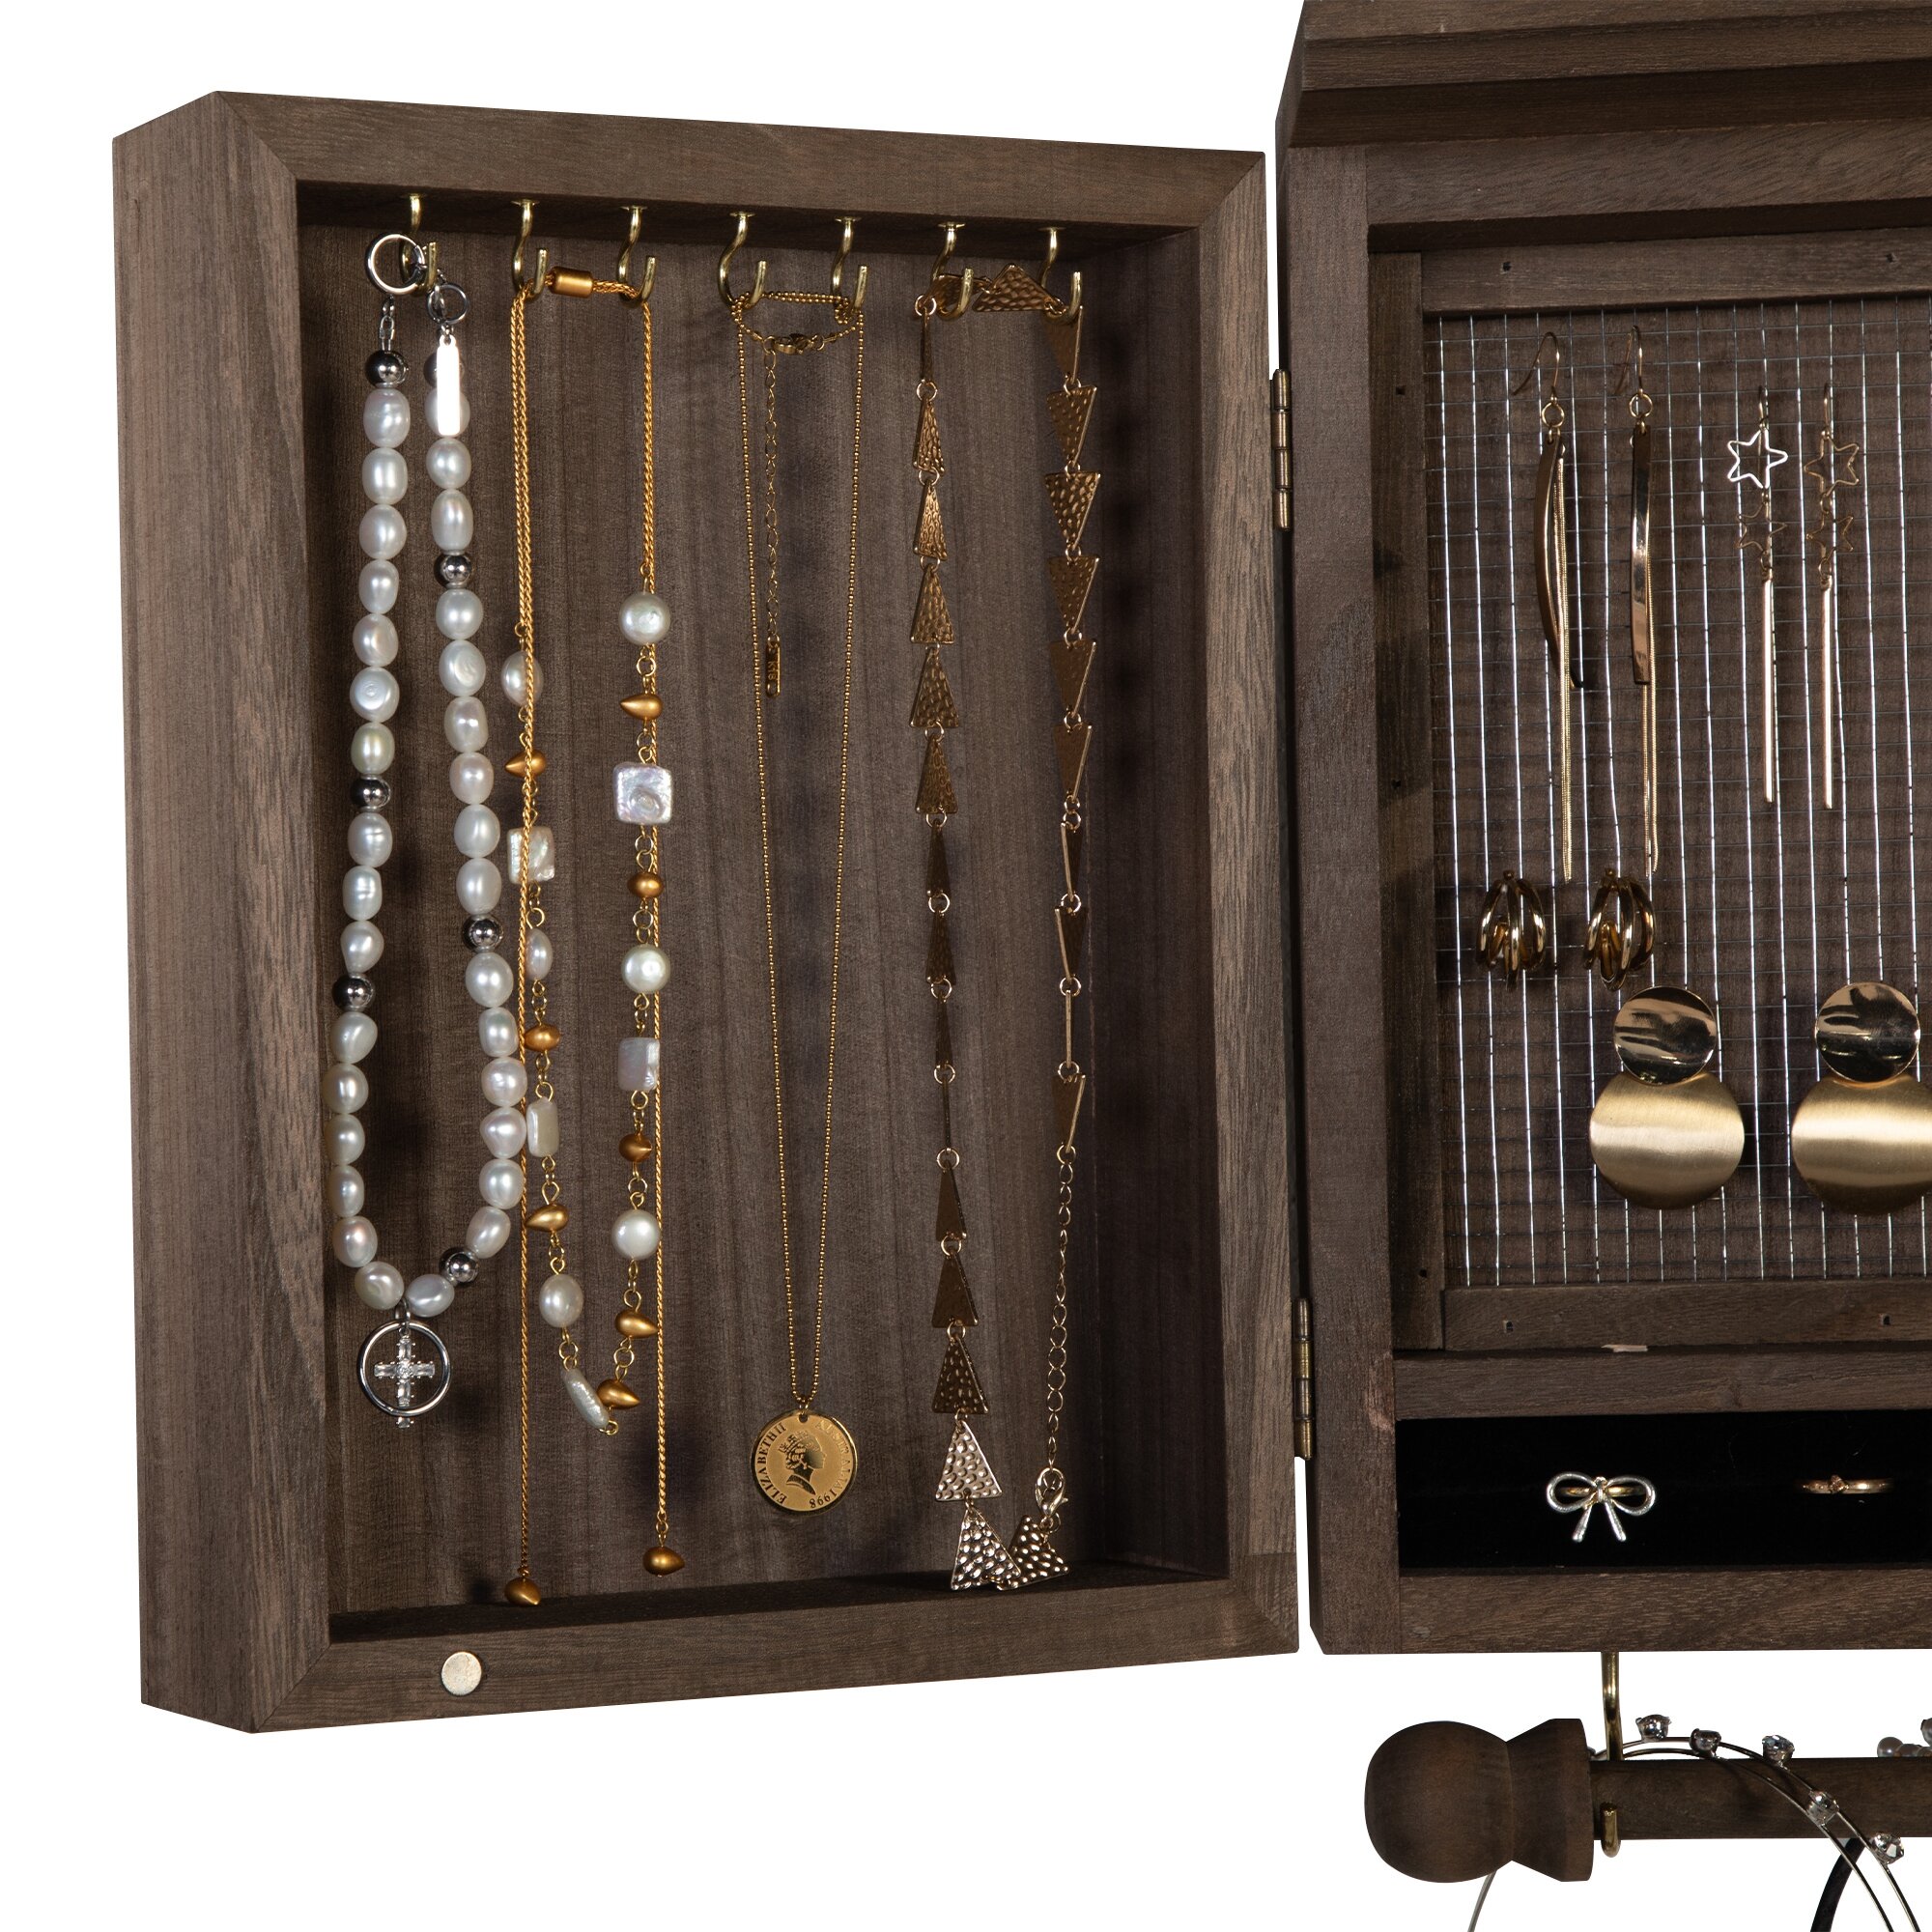 Includes Hook Organizer Bracelets Accessories Earings Rings Rustic Wall Mounted Jewelry Organizer,Vintage Wooden Hanging Jewelry Holder Box with Barndoor Decor for Necklaces 